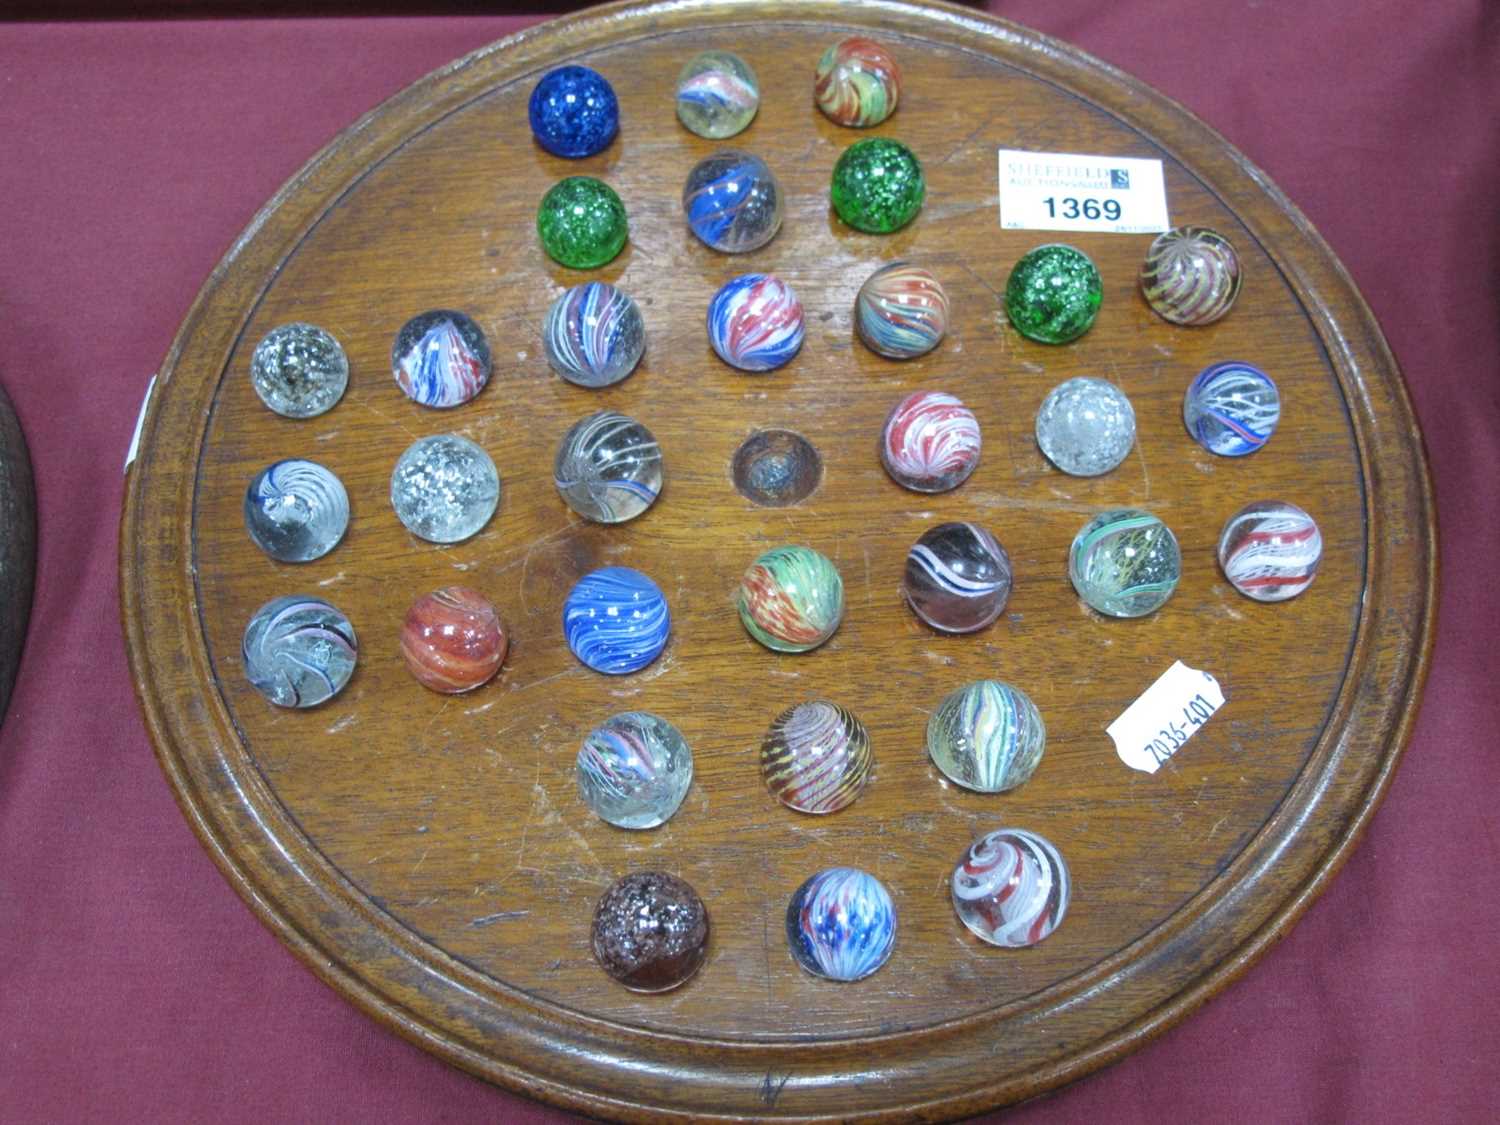 A solitaire board complete with Victorian marbles (32) dimensions board 27cm and all marbles about